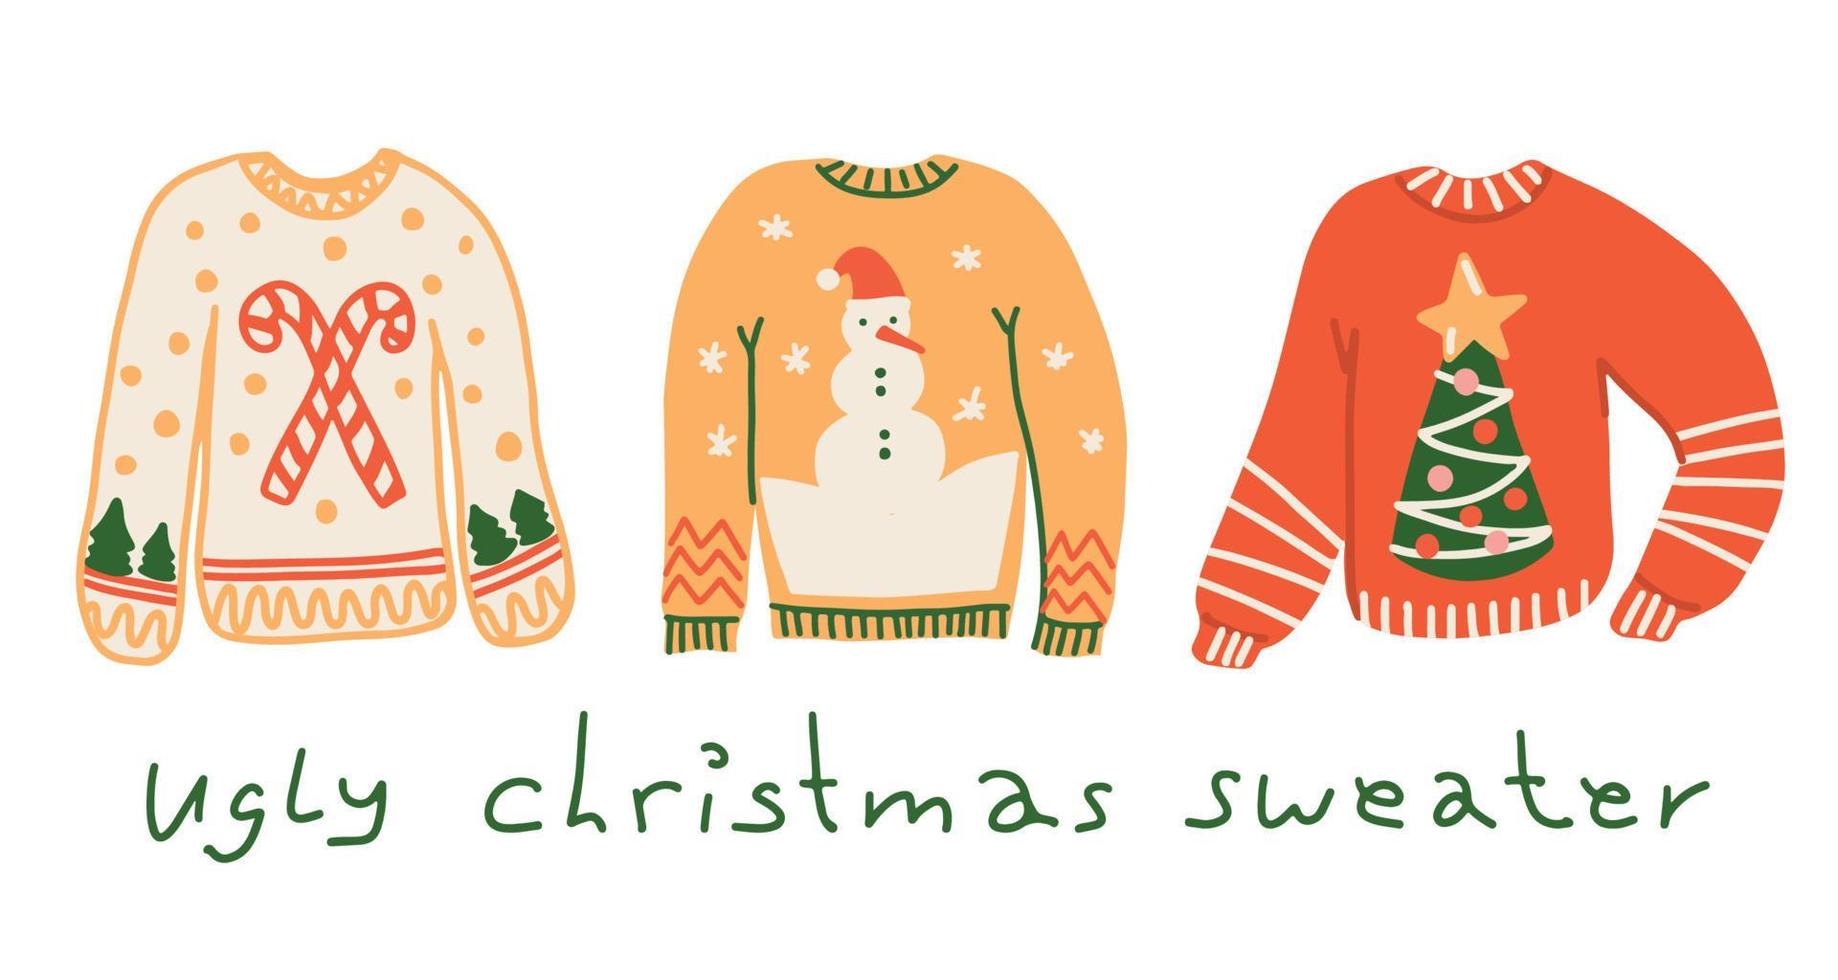 Set of ugly Christmas sweaters. Cute and funny traditional knitted sweaters decorated with Christmas tree, snowman and candy cane. Hand drawn cartoon style vector illustration